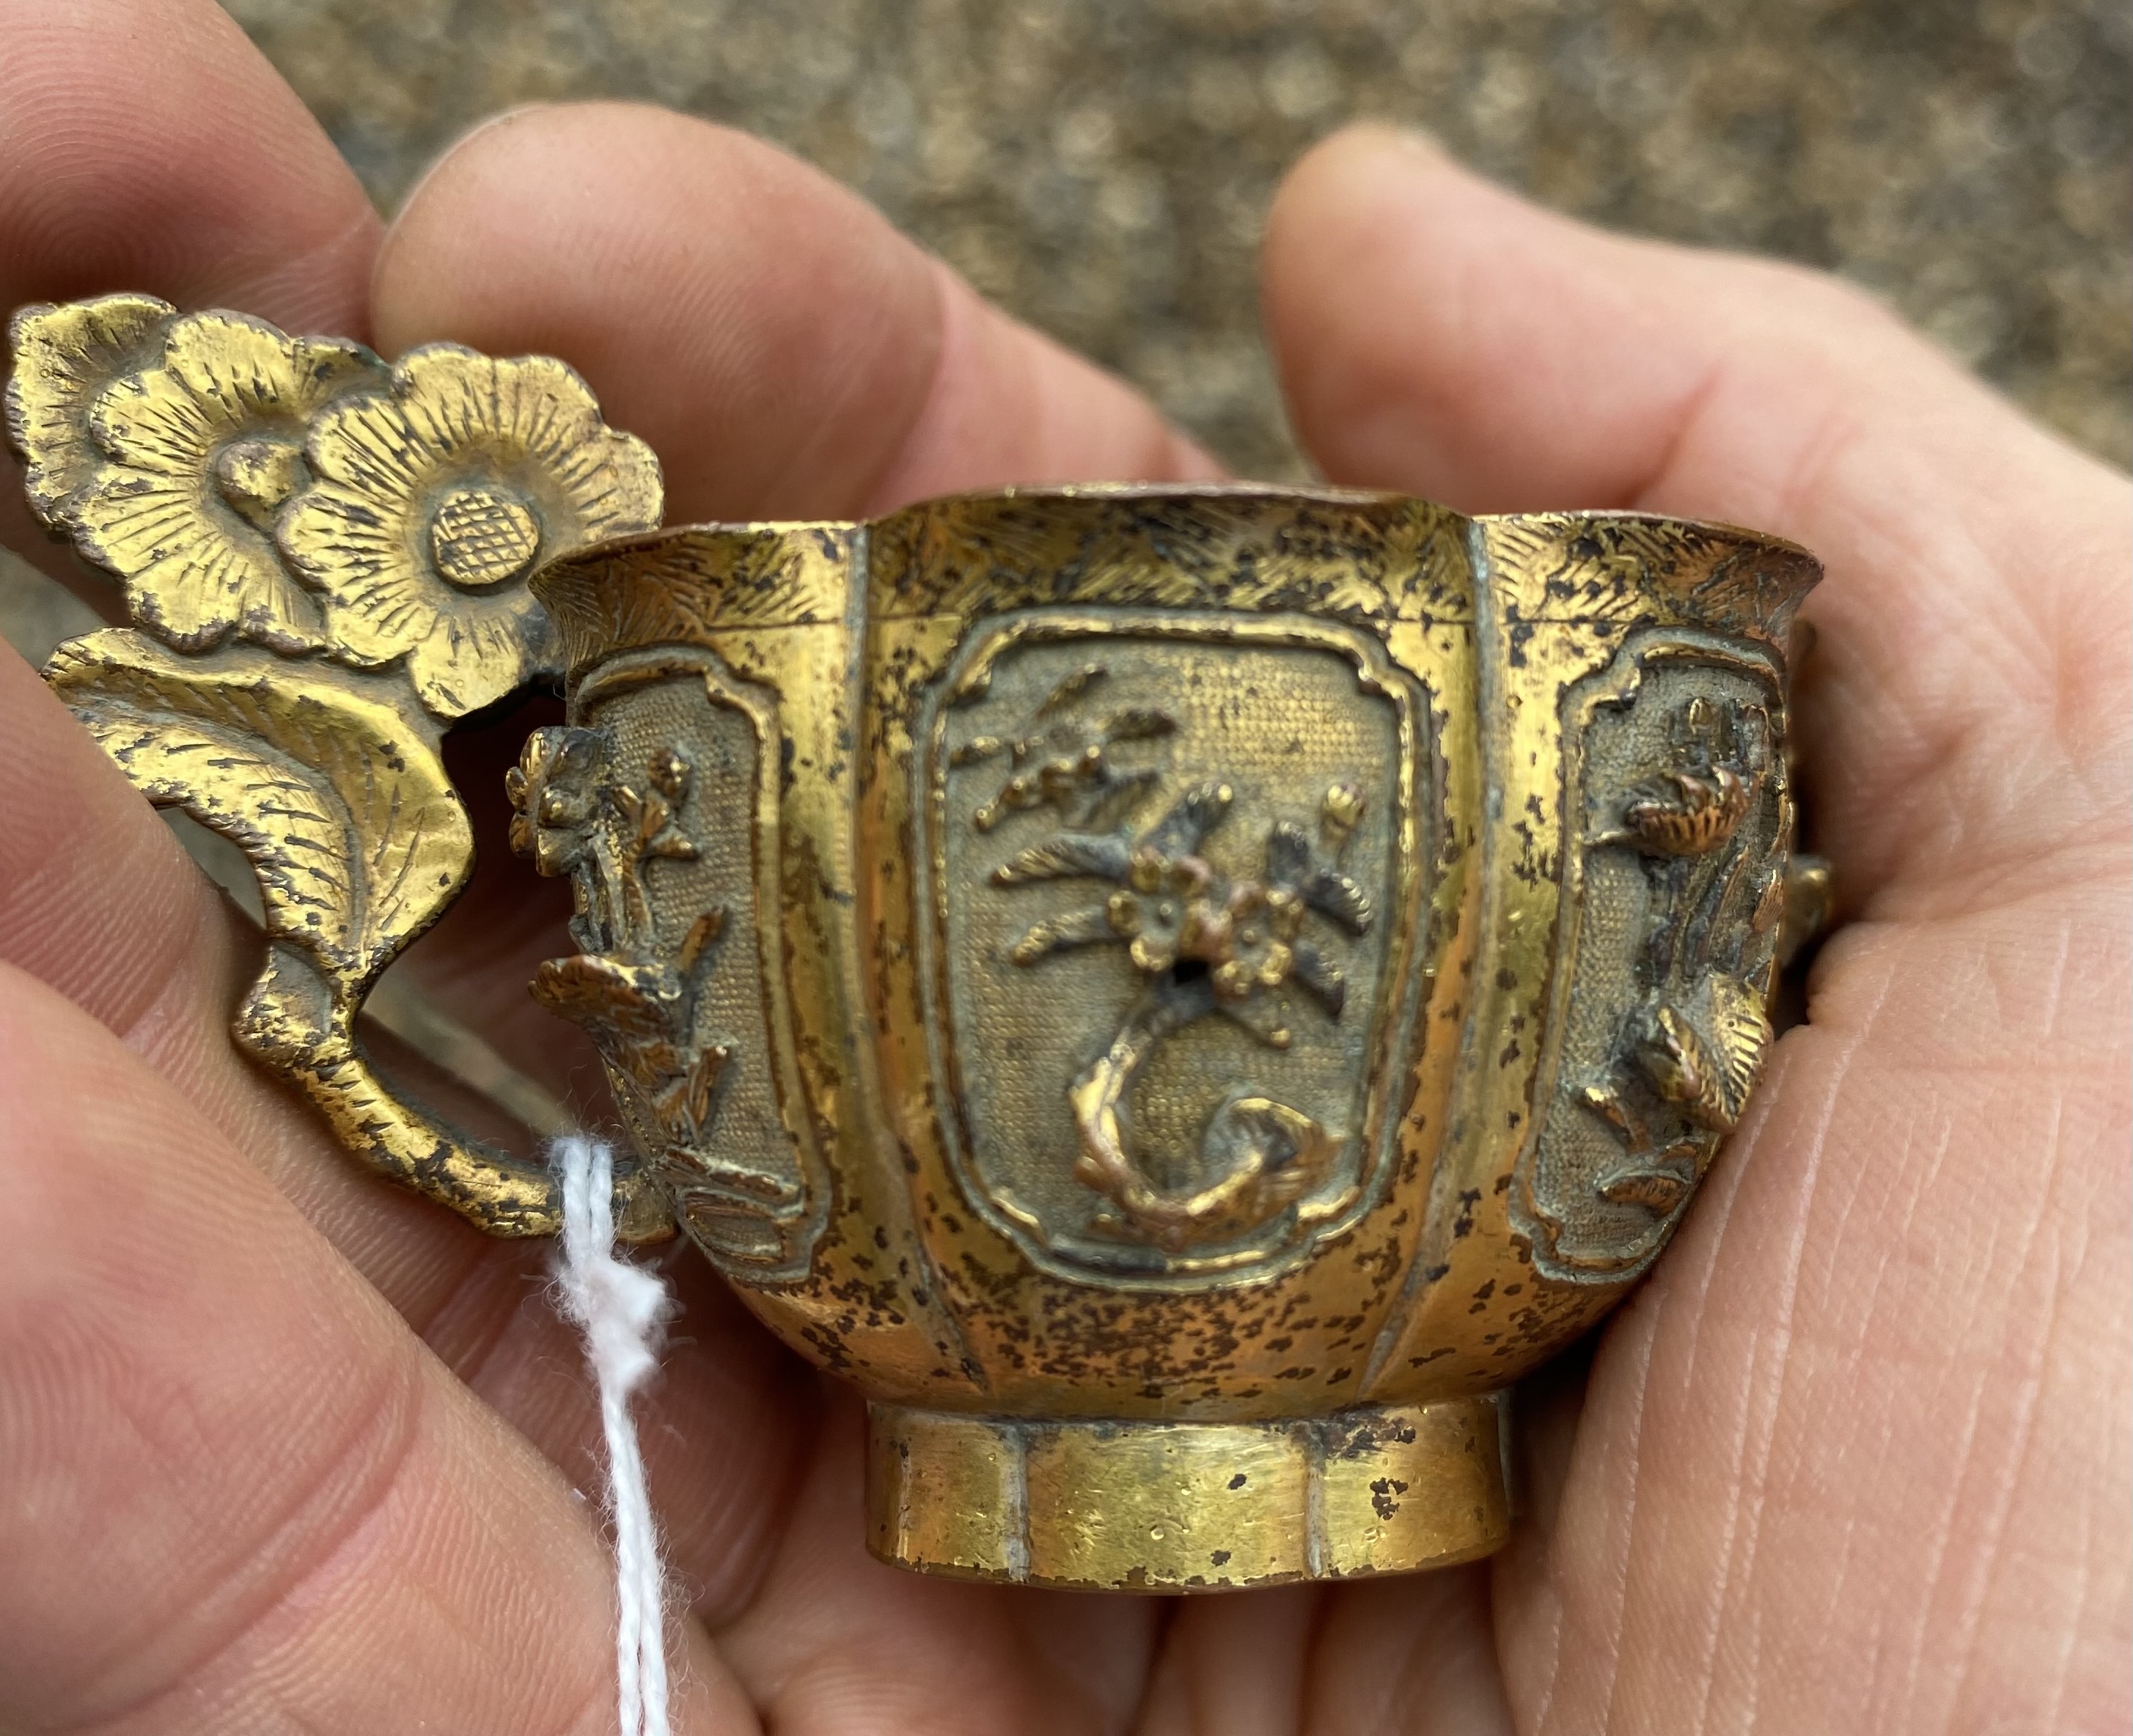 A SMALL CHINESE GILT-BRONZE CUP, QING DYNASTY, 17TH CENTURY - Image 6 of 9